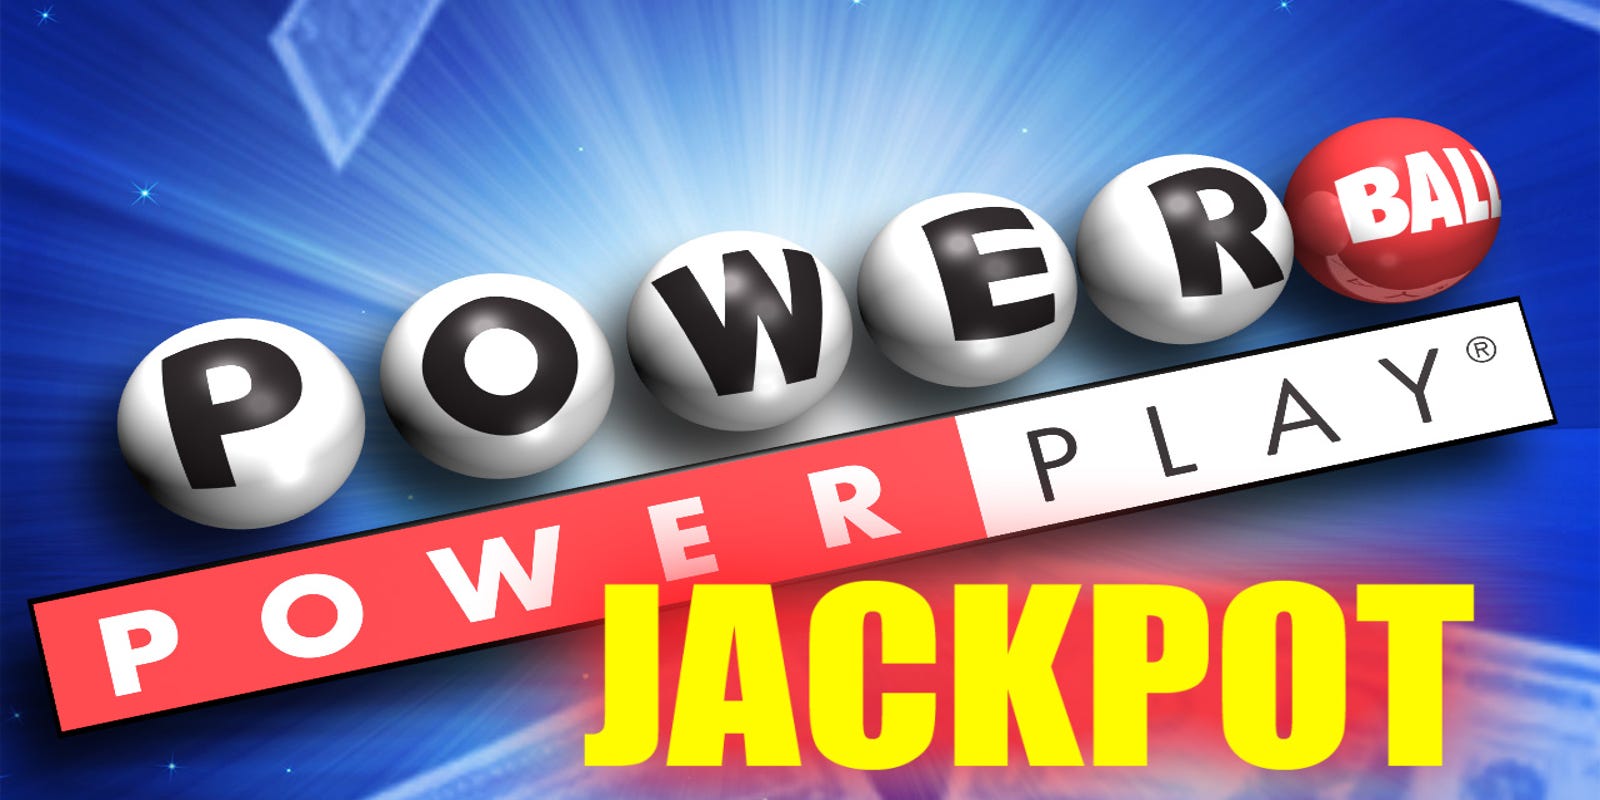 Powerball Numbers From Last Night - Powerball Results, Numbers for 5/27